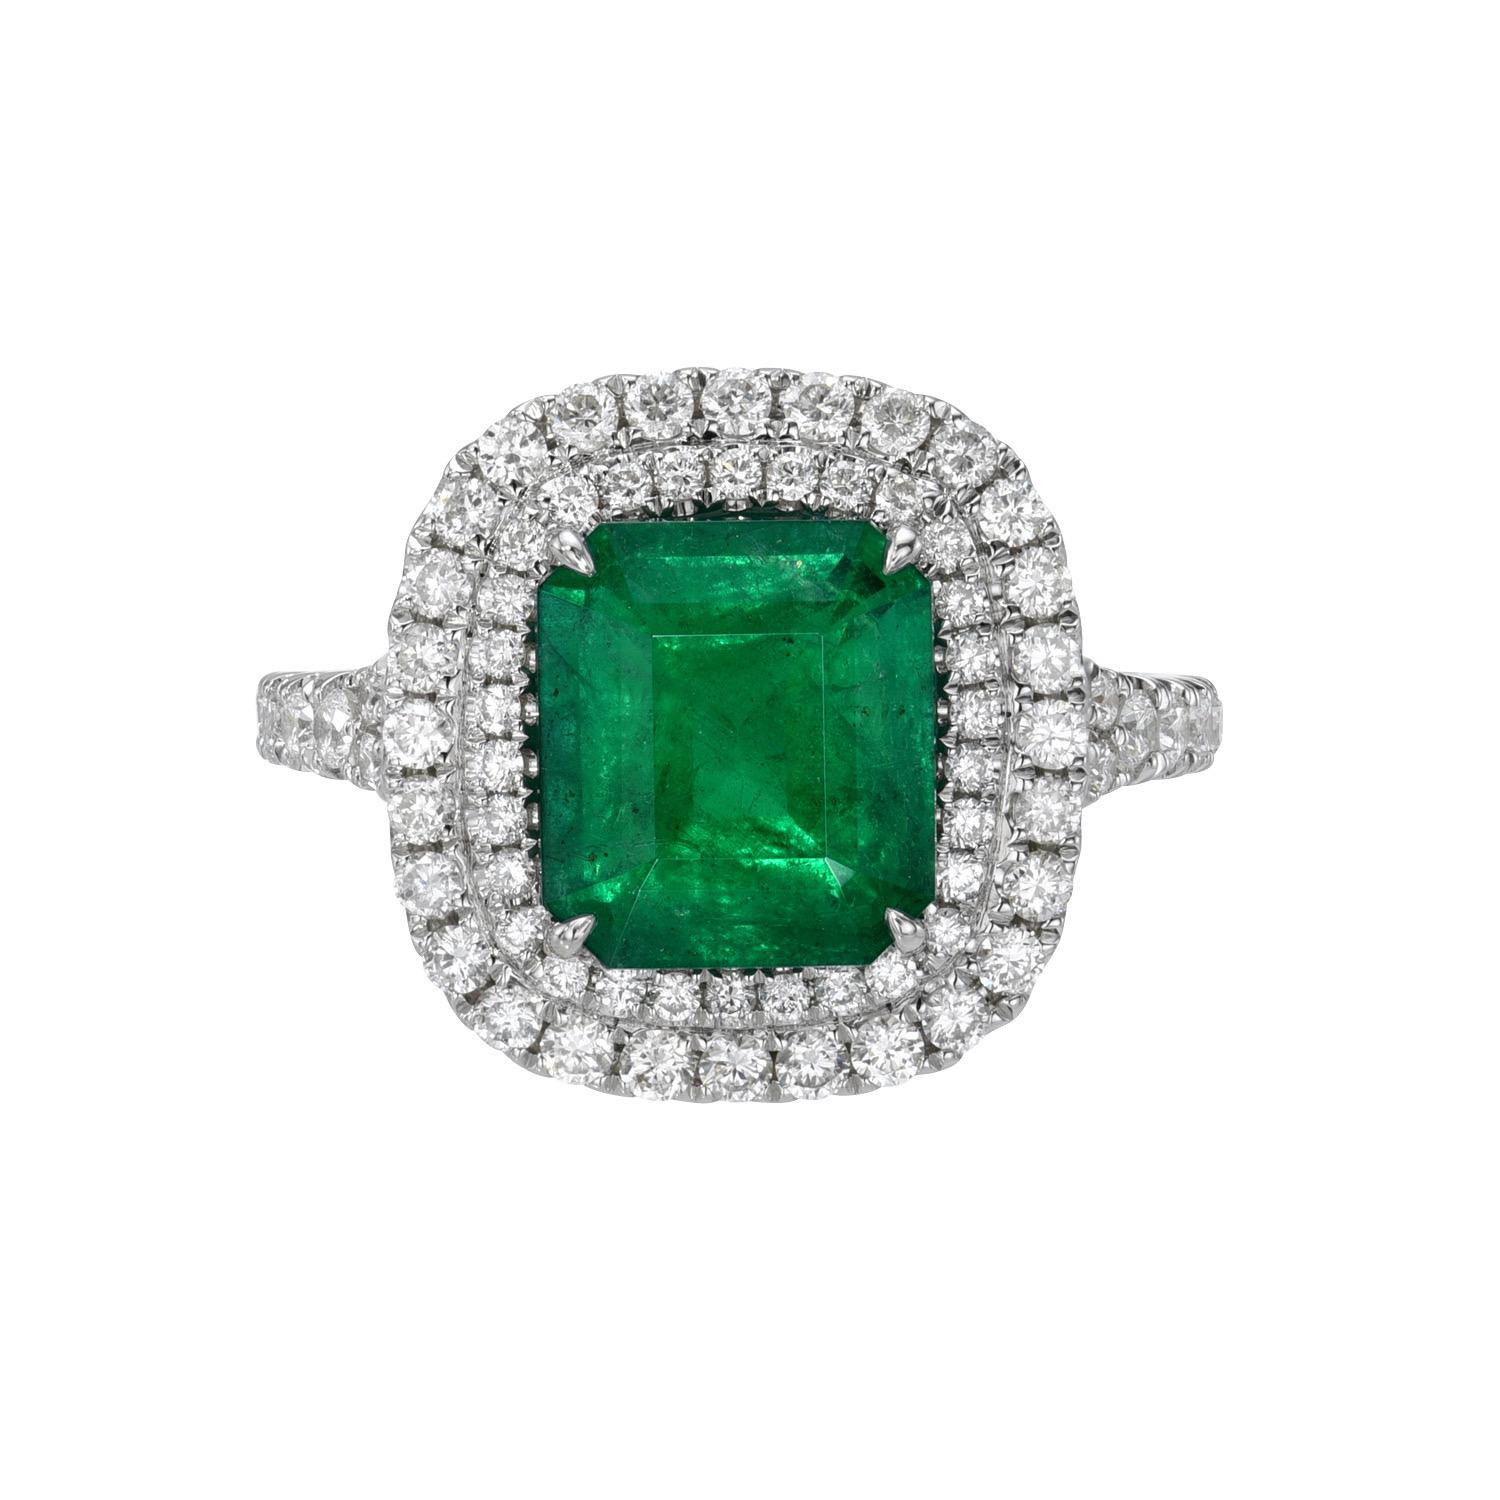 Bright 2.88 carat Emerald Cut Emerald, 18K white gold ring, decorated with round brilliant diamonds, F-G/VS, totaling 0.82 carats.
Ring size 6.5. Resizing is complementary upon request.
Returns are accepted and paid by us within 7 days of delivery.